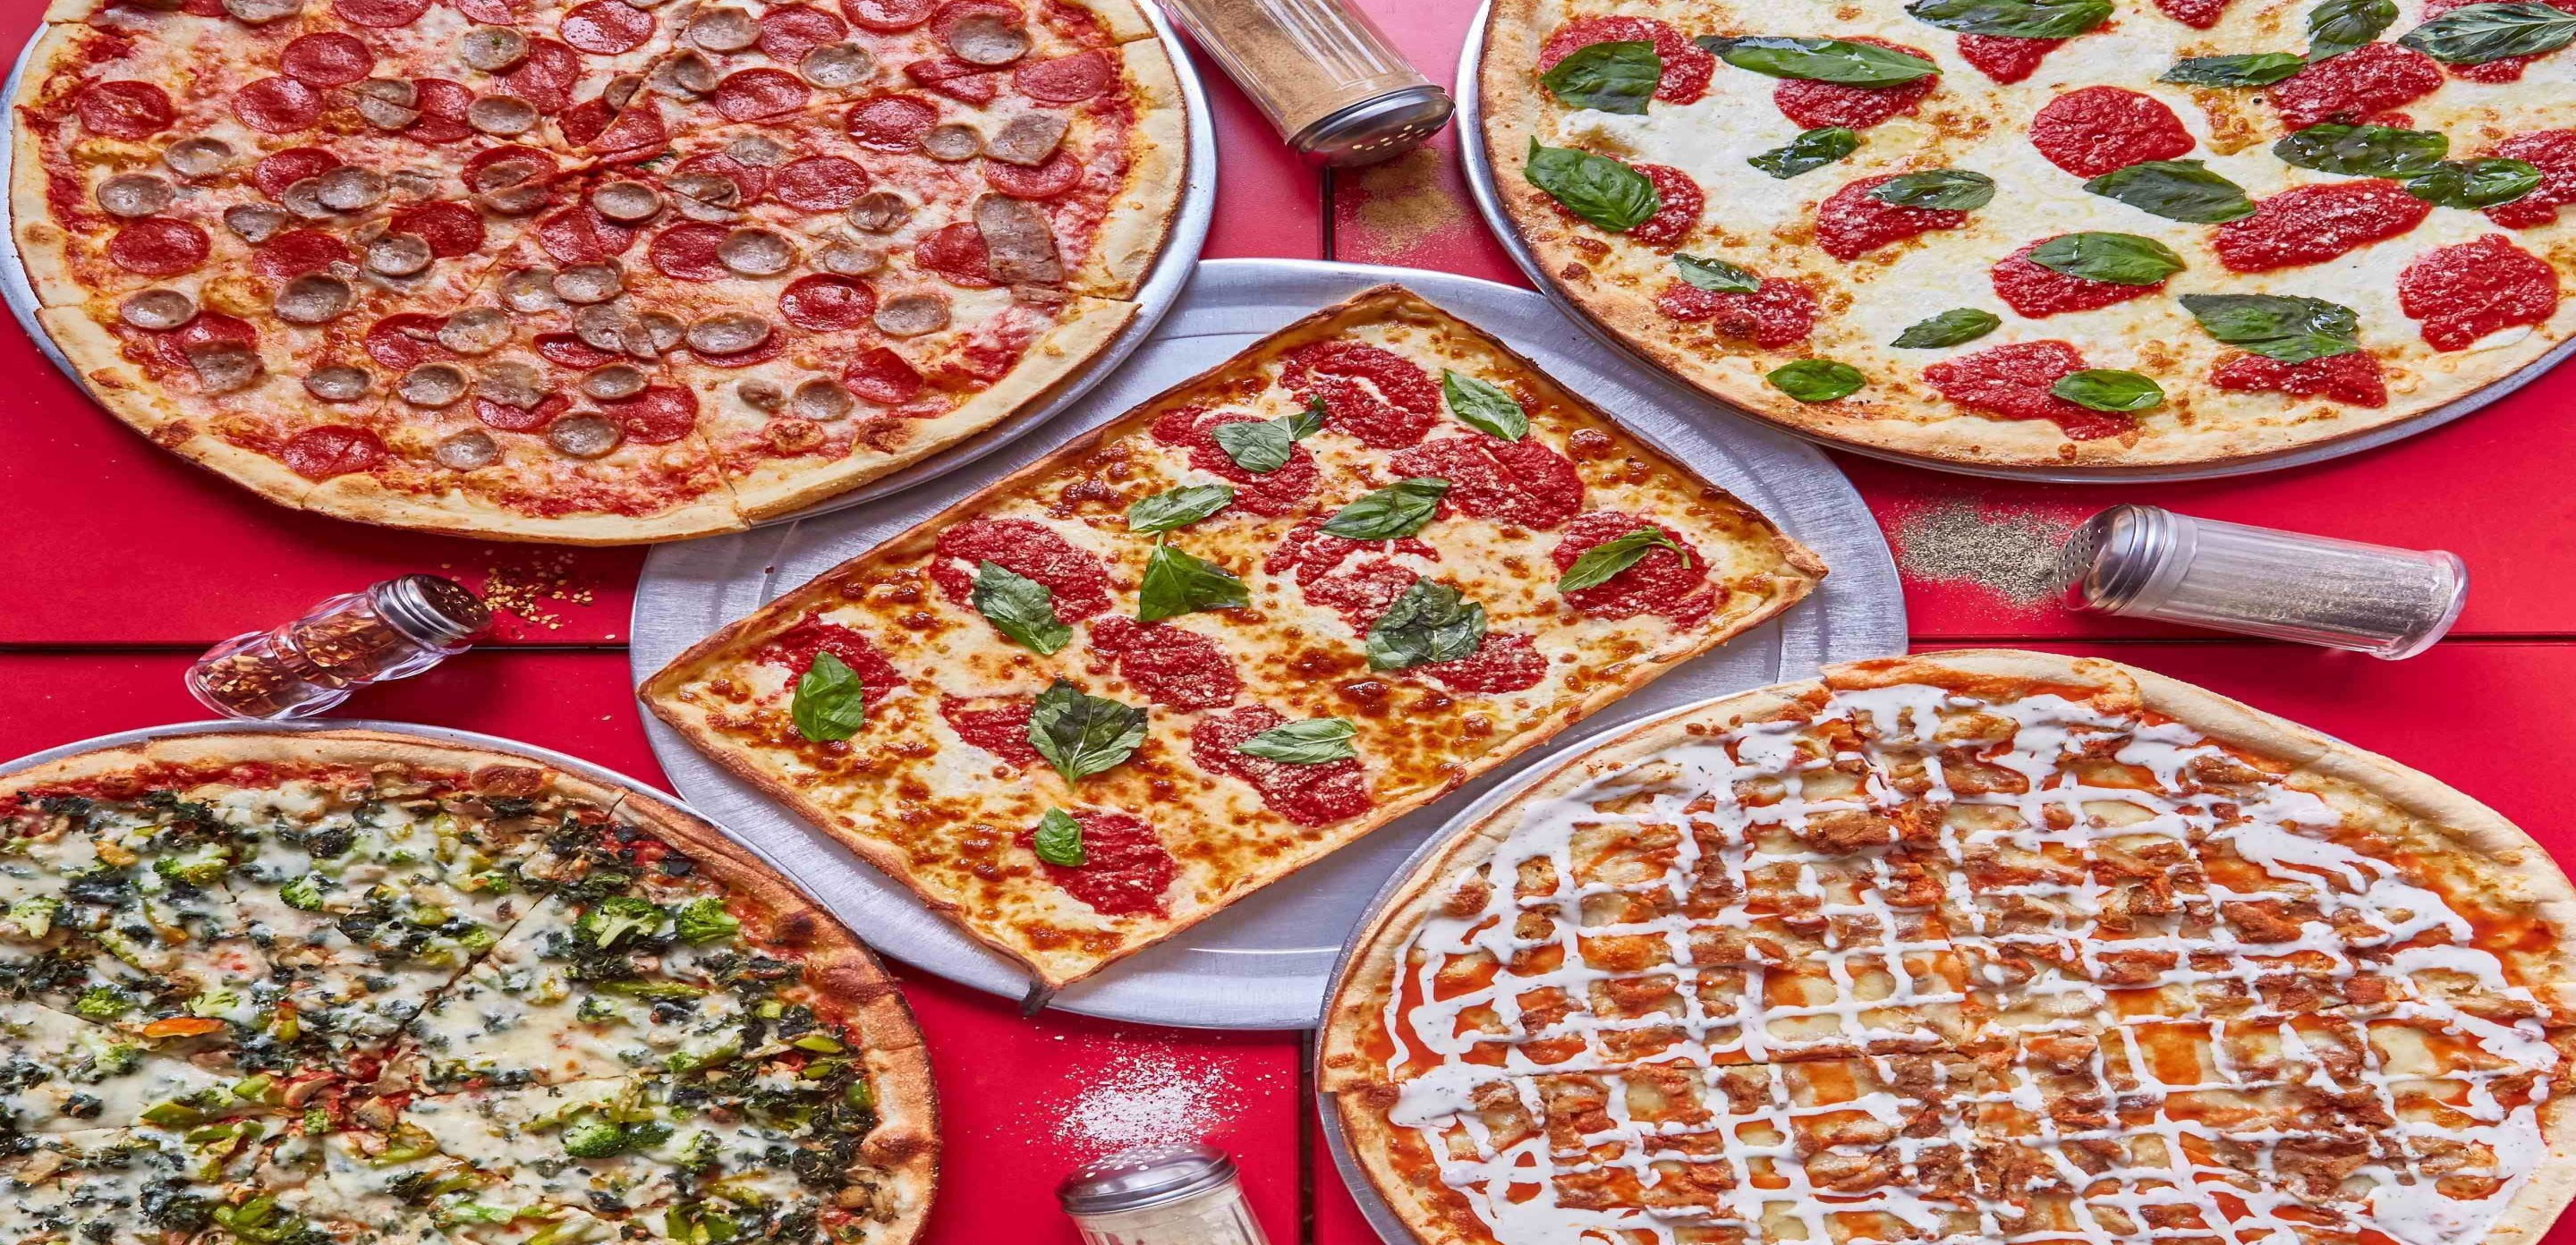 Deliciously Profitable Pizzeria for Sale - Your Slice of Success